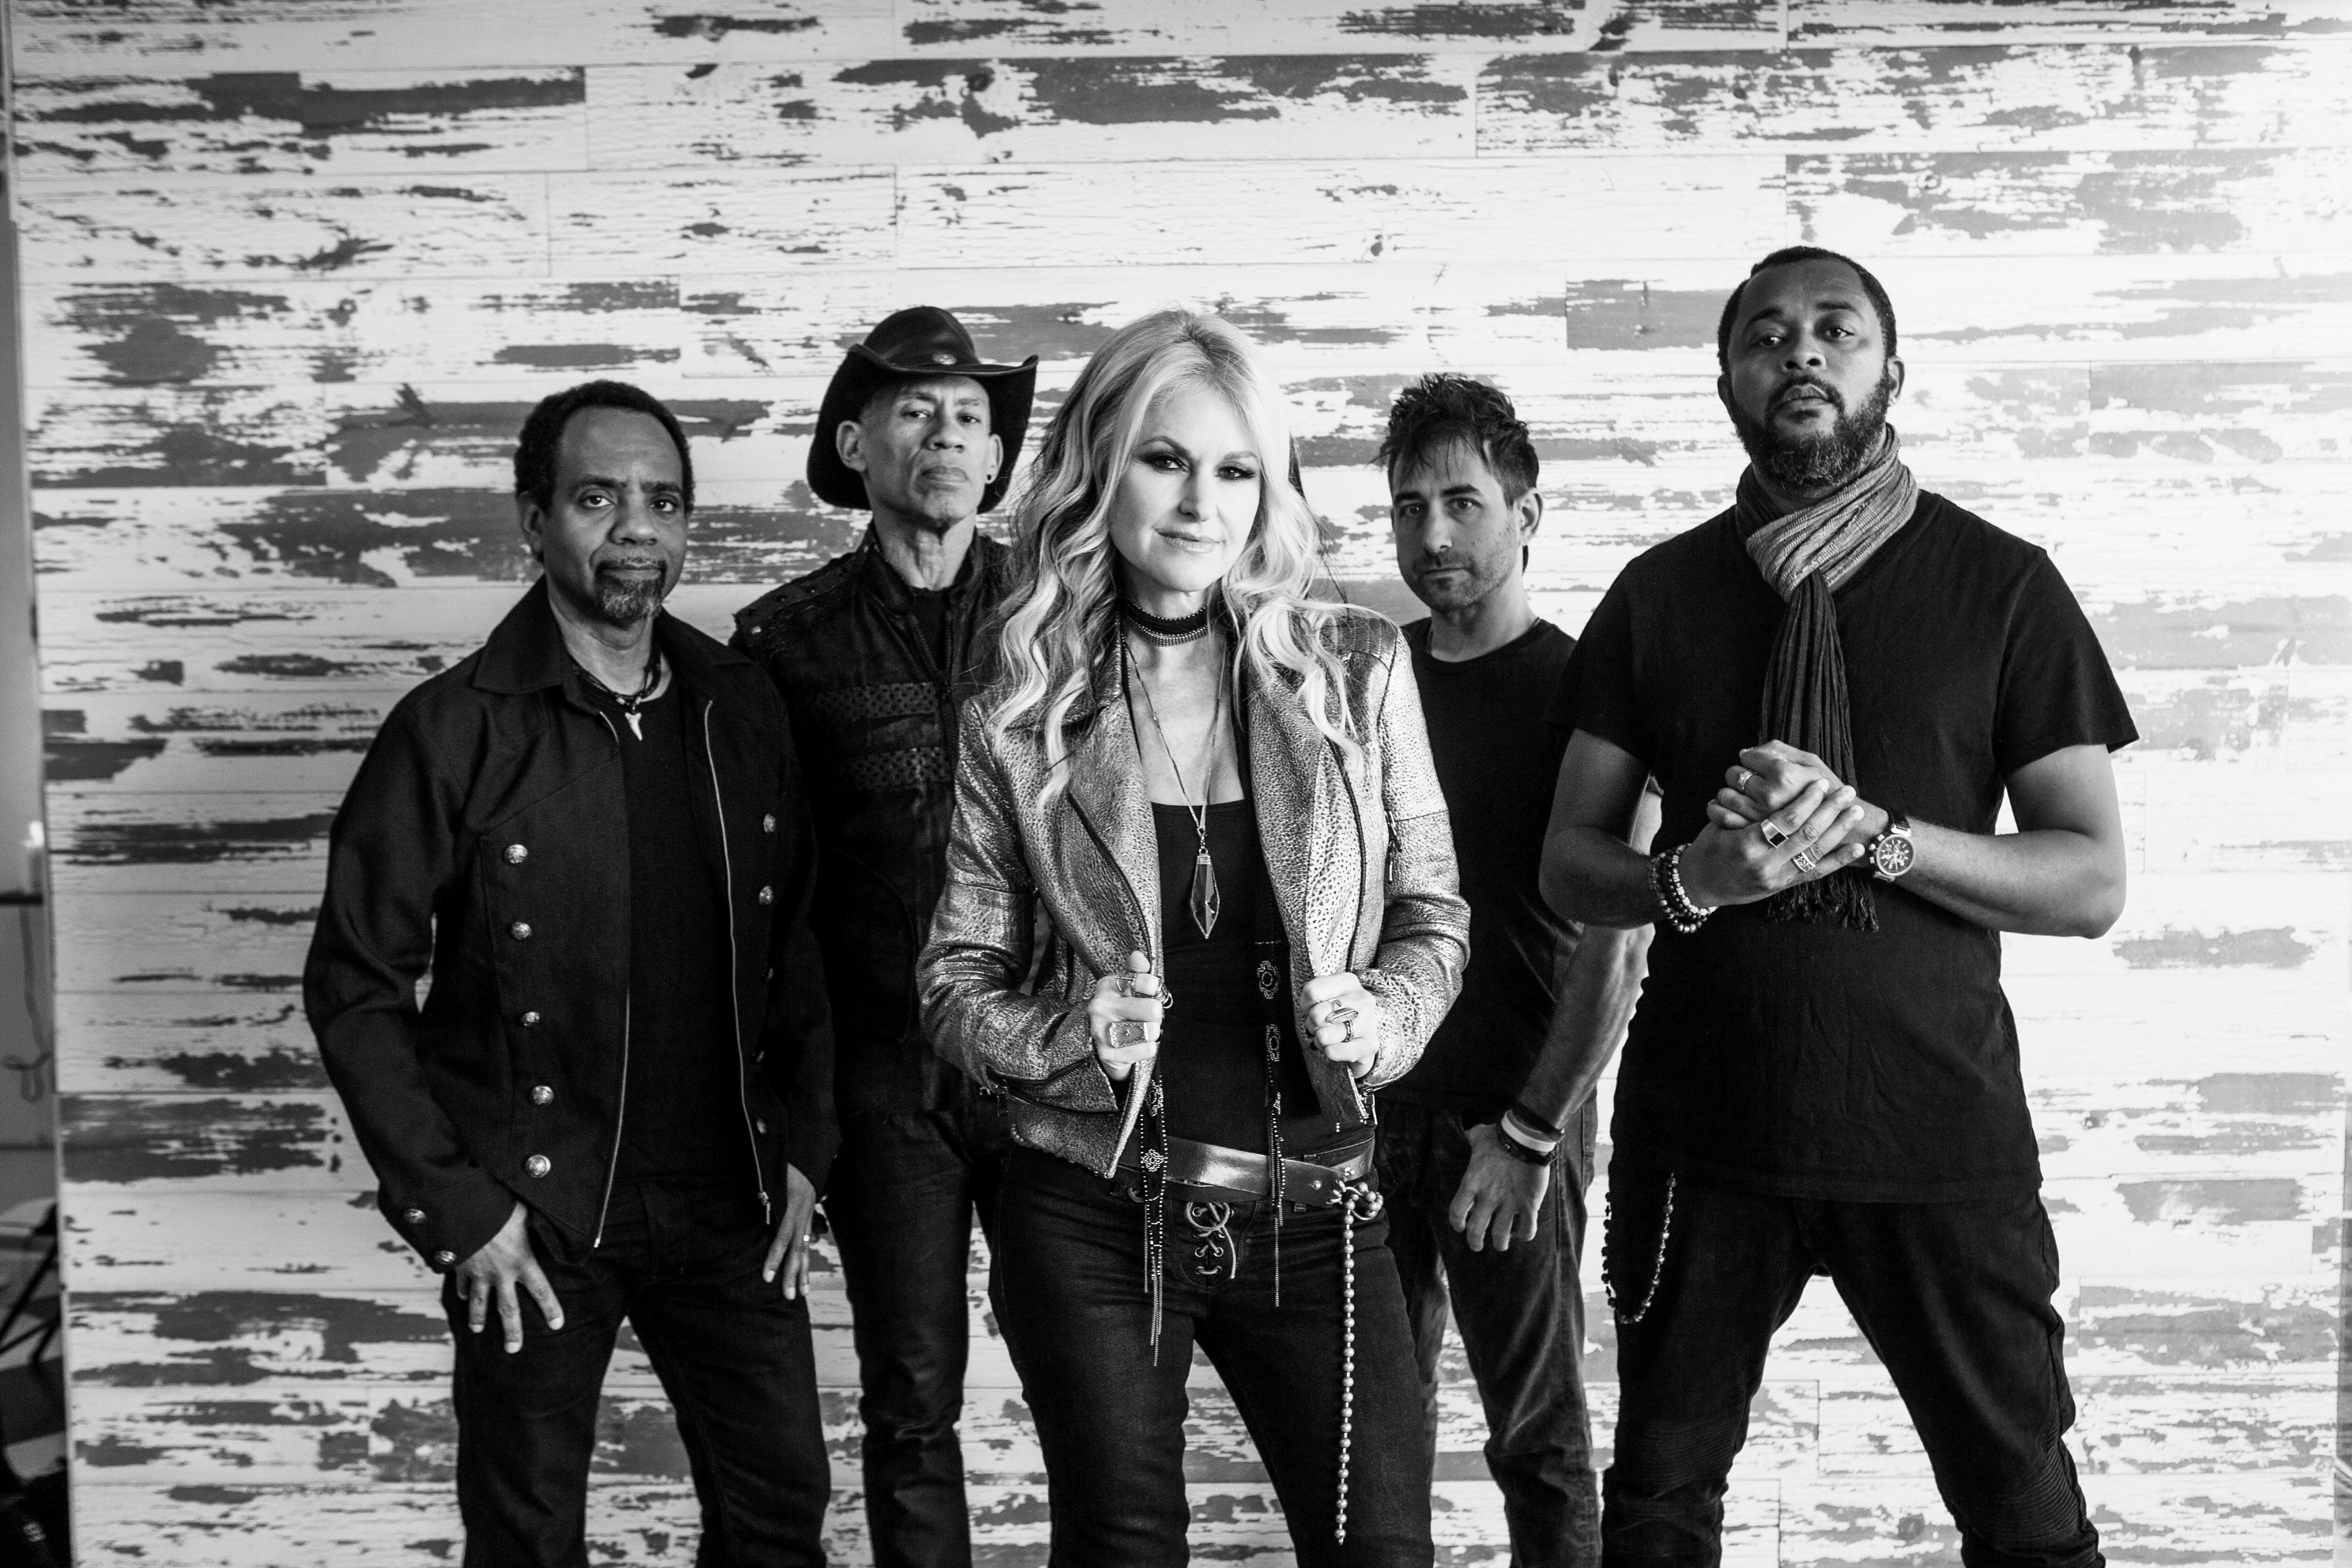 Mindi Abair and the Boneshakers Examine Life’s Endless Hustle With “Mess I’m In” (premiere + interview)